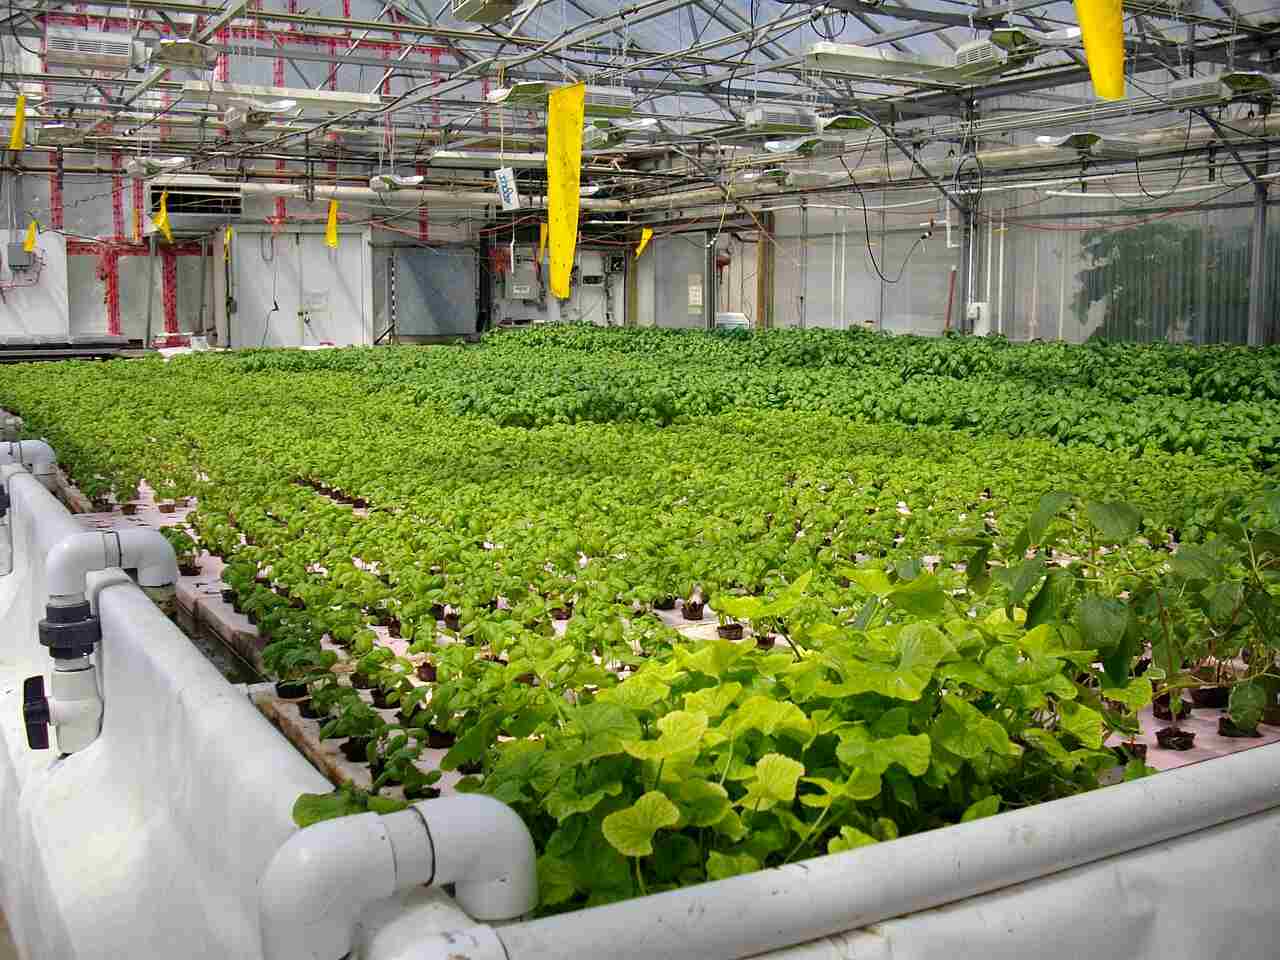 Benefits of Aquaponics: Relatively Rapid Growth and Quality Produce are Both Associated With Aquaponics (Credit: Bryghtknyght 2010 .CC BY 3.0.)